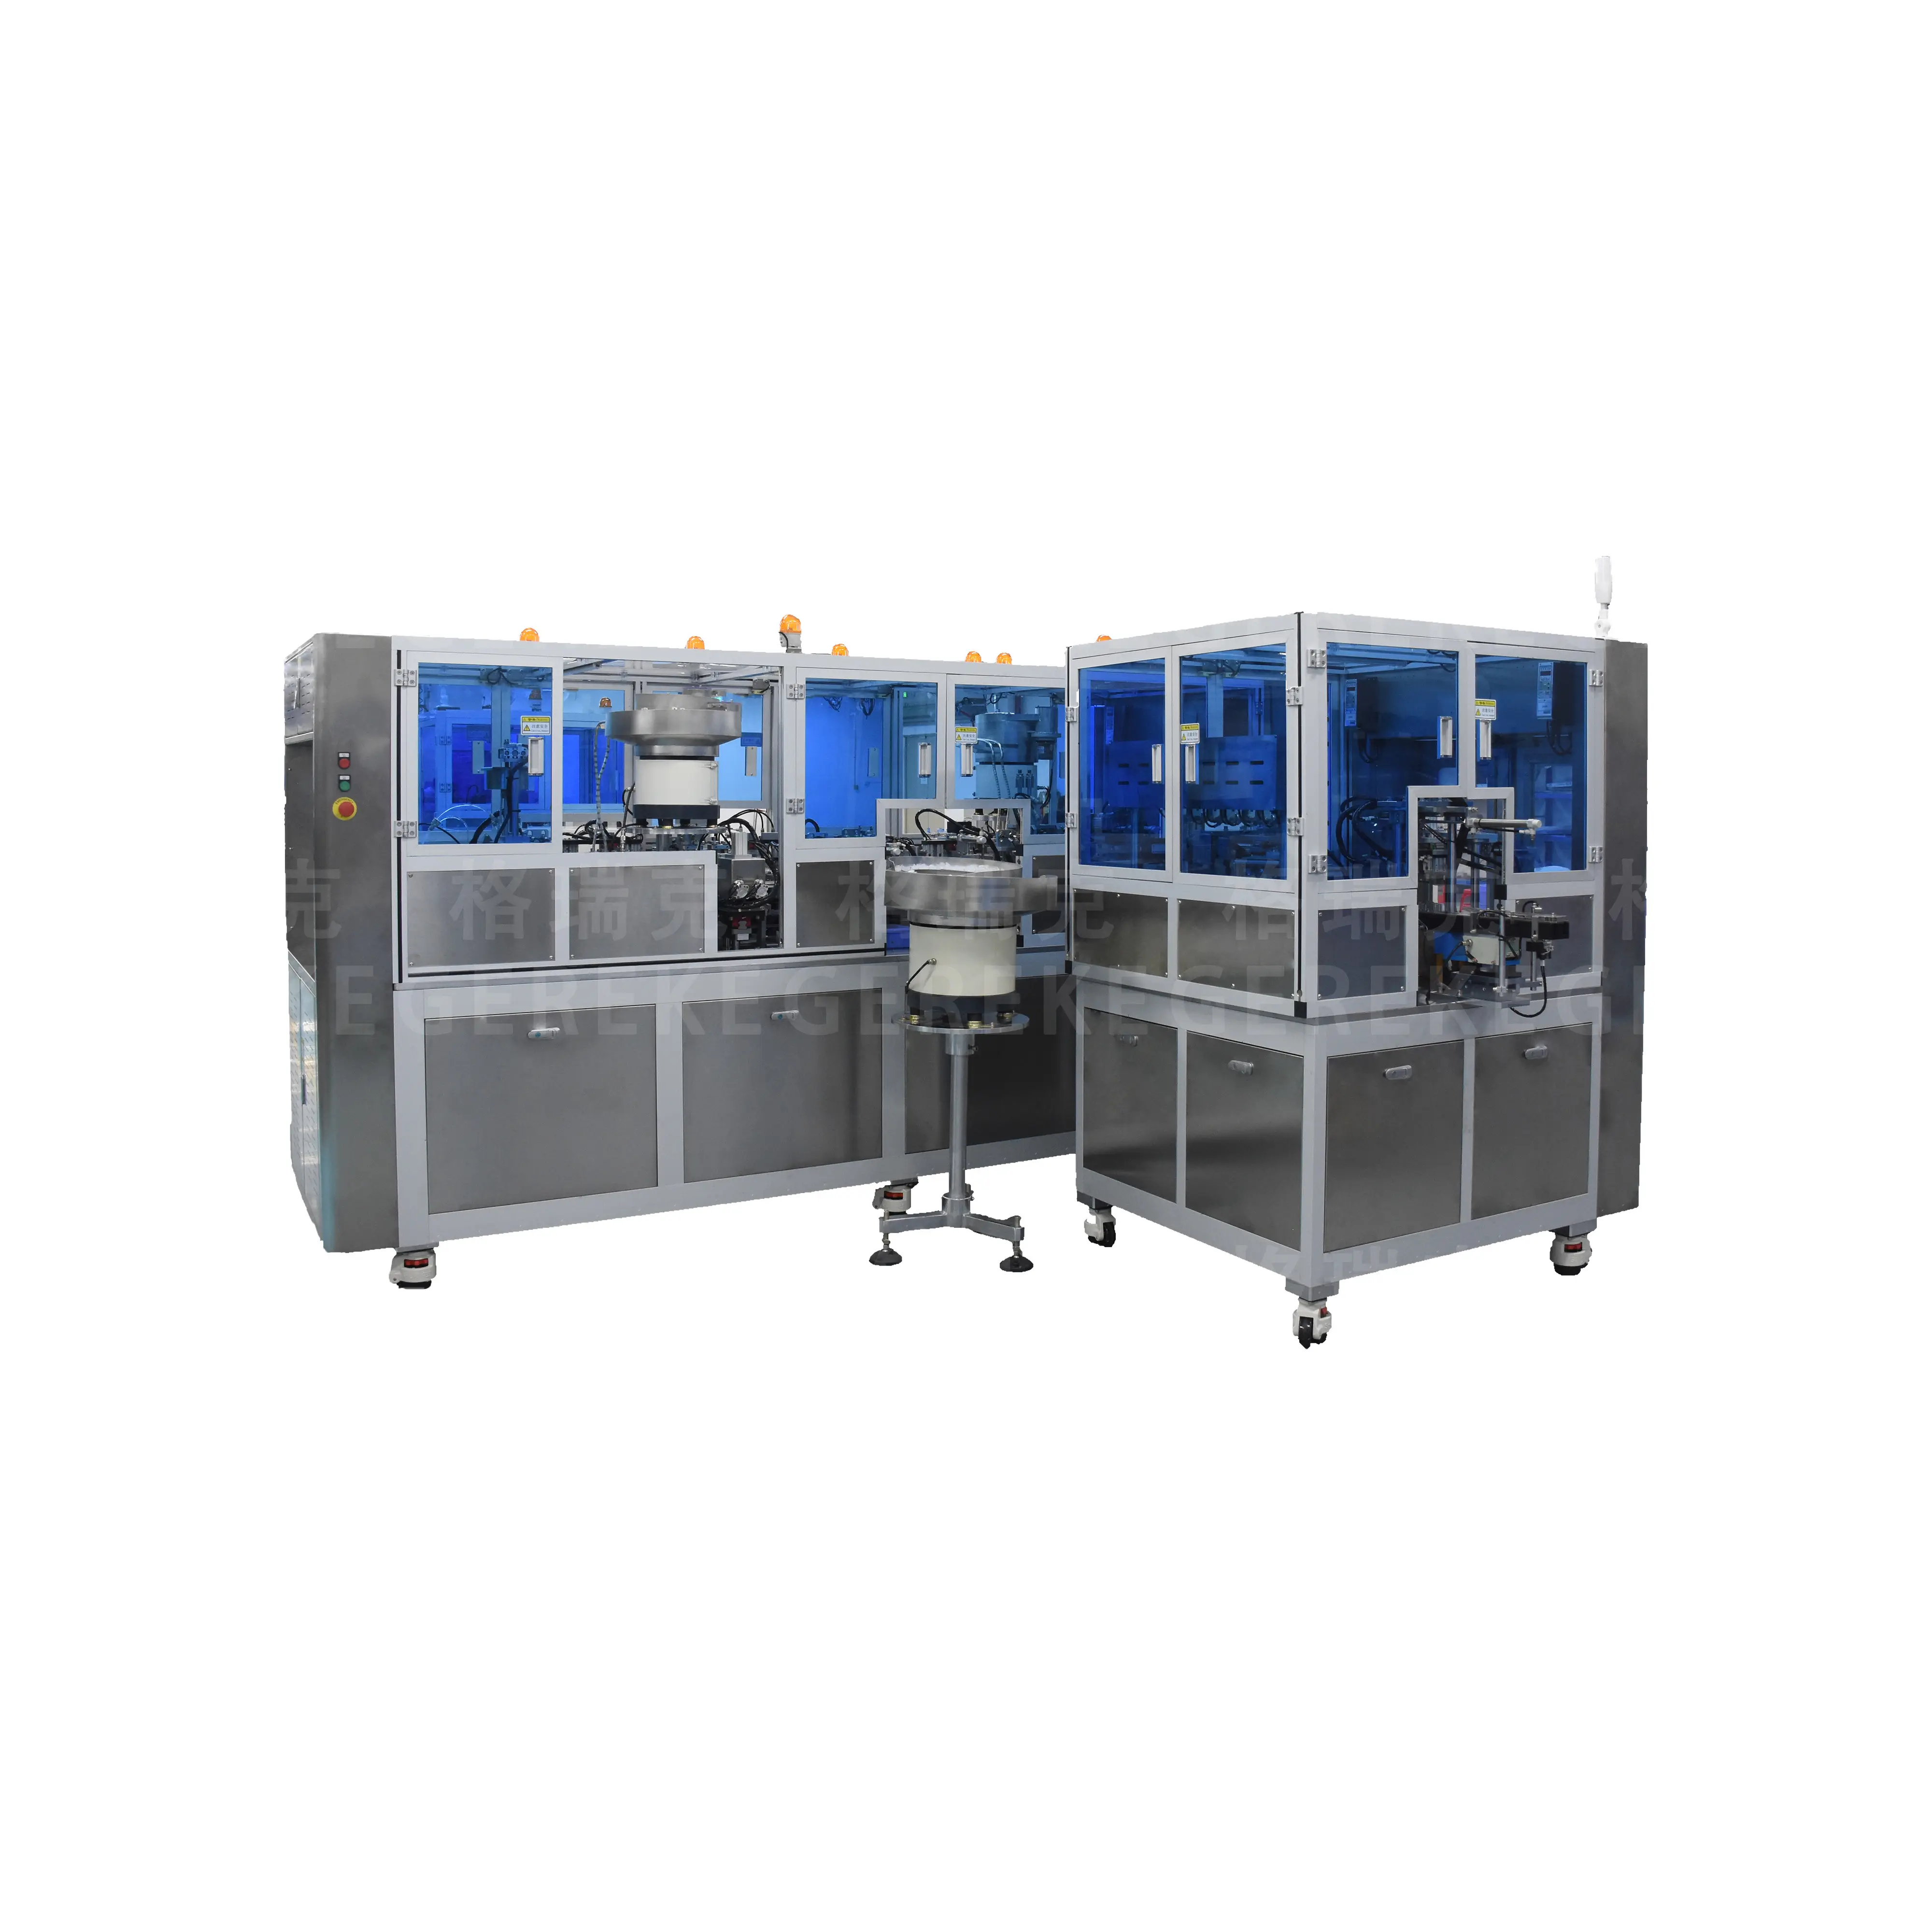 Pump core automatic assembly and inspection Machine